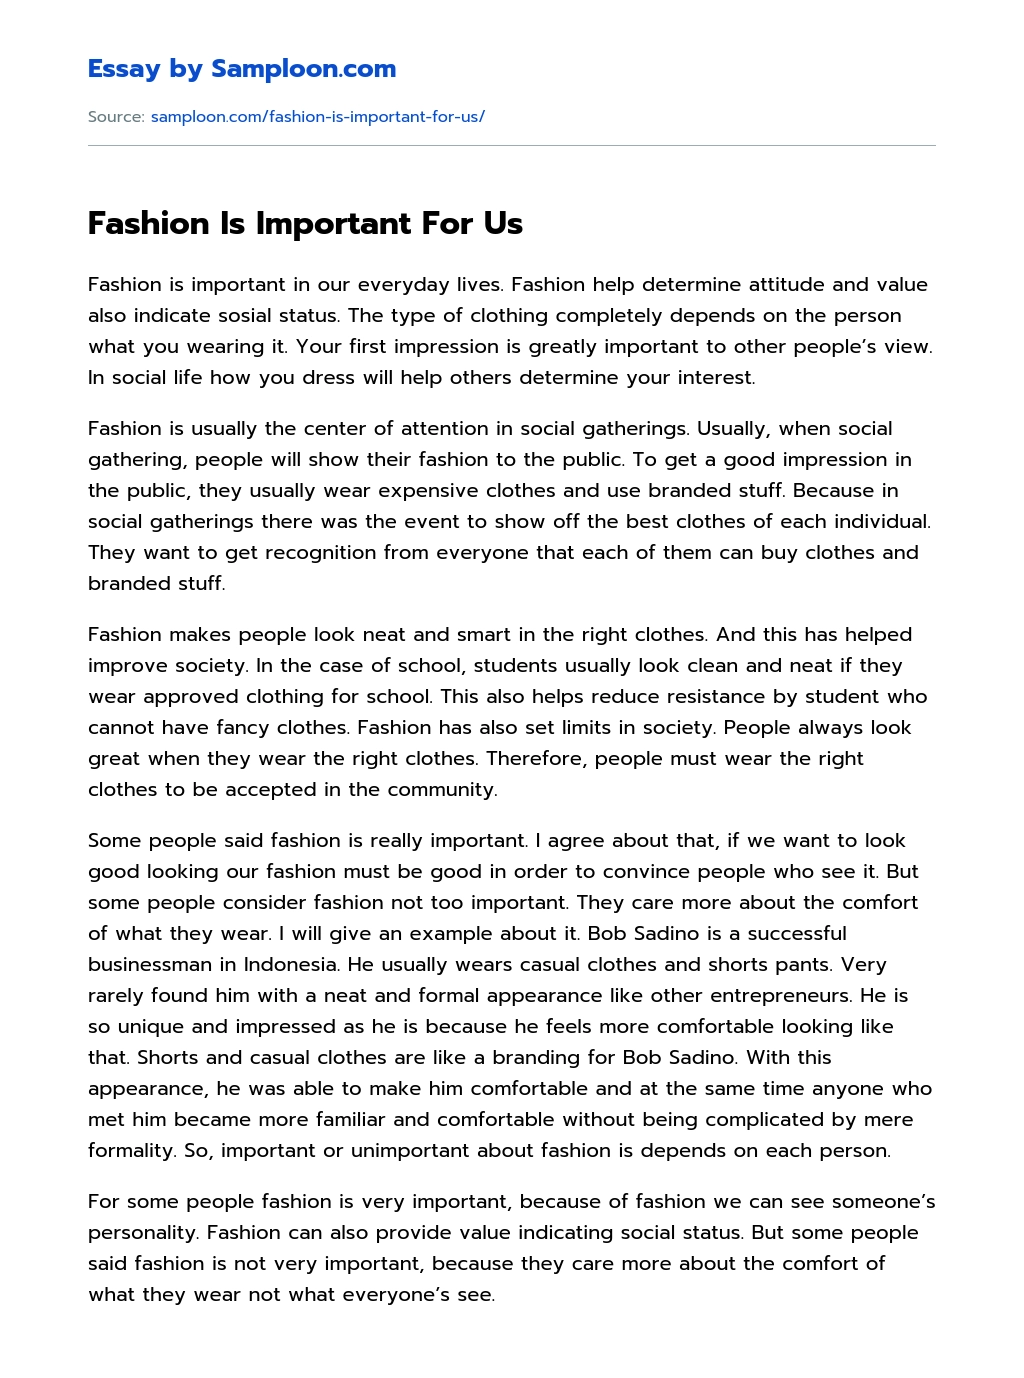 essay on the topic fashion